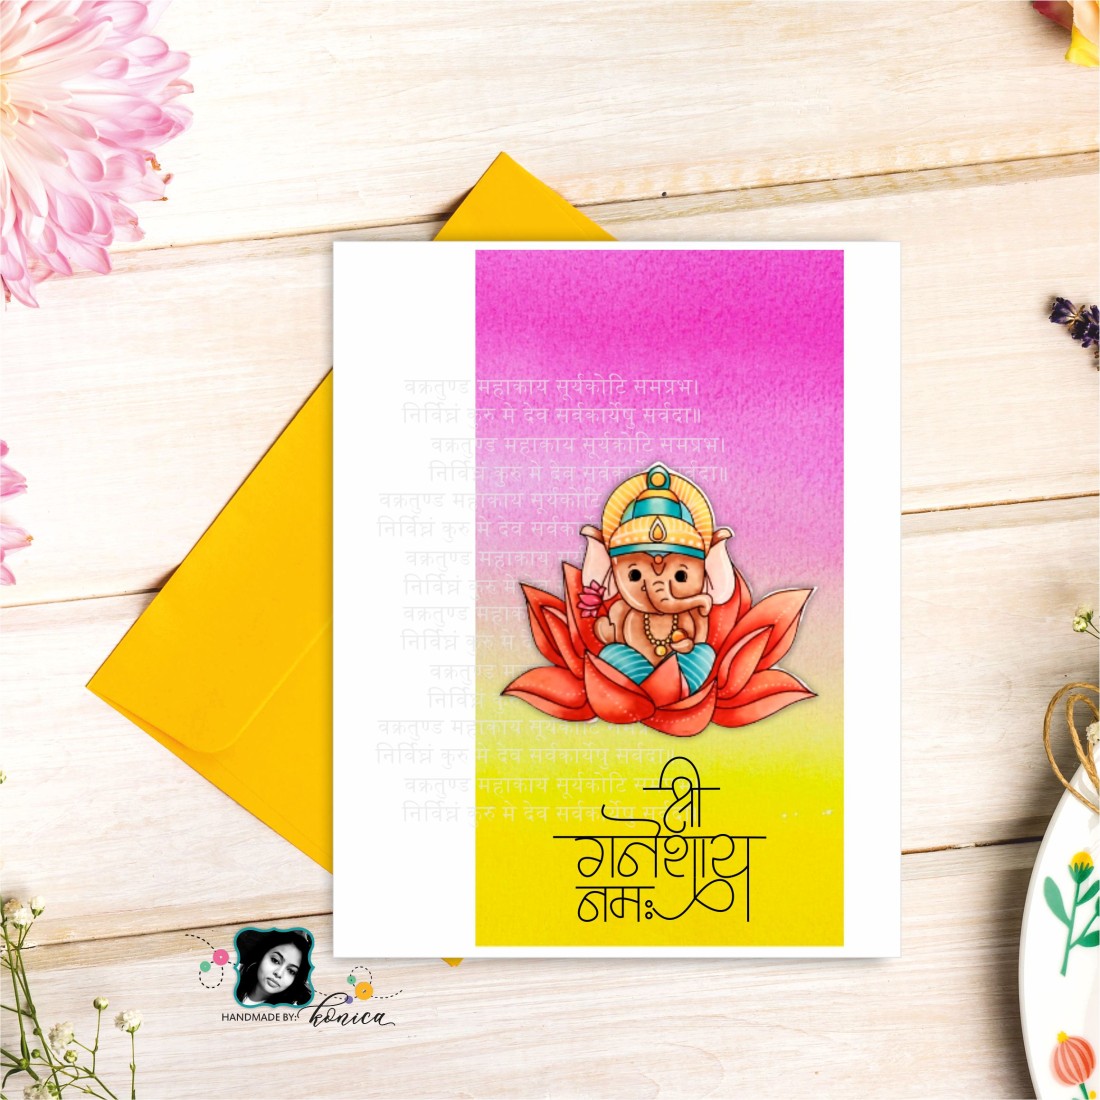 Craftyscrappers Stamps- LORD GANESHA